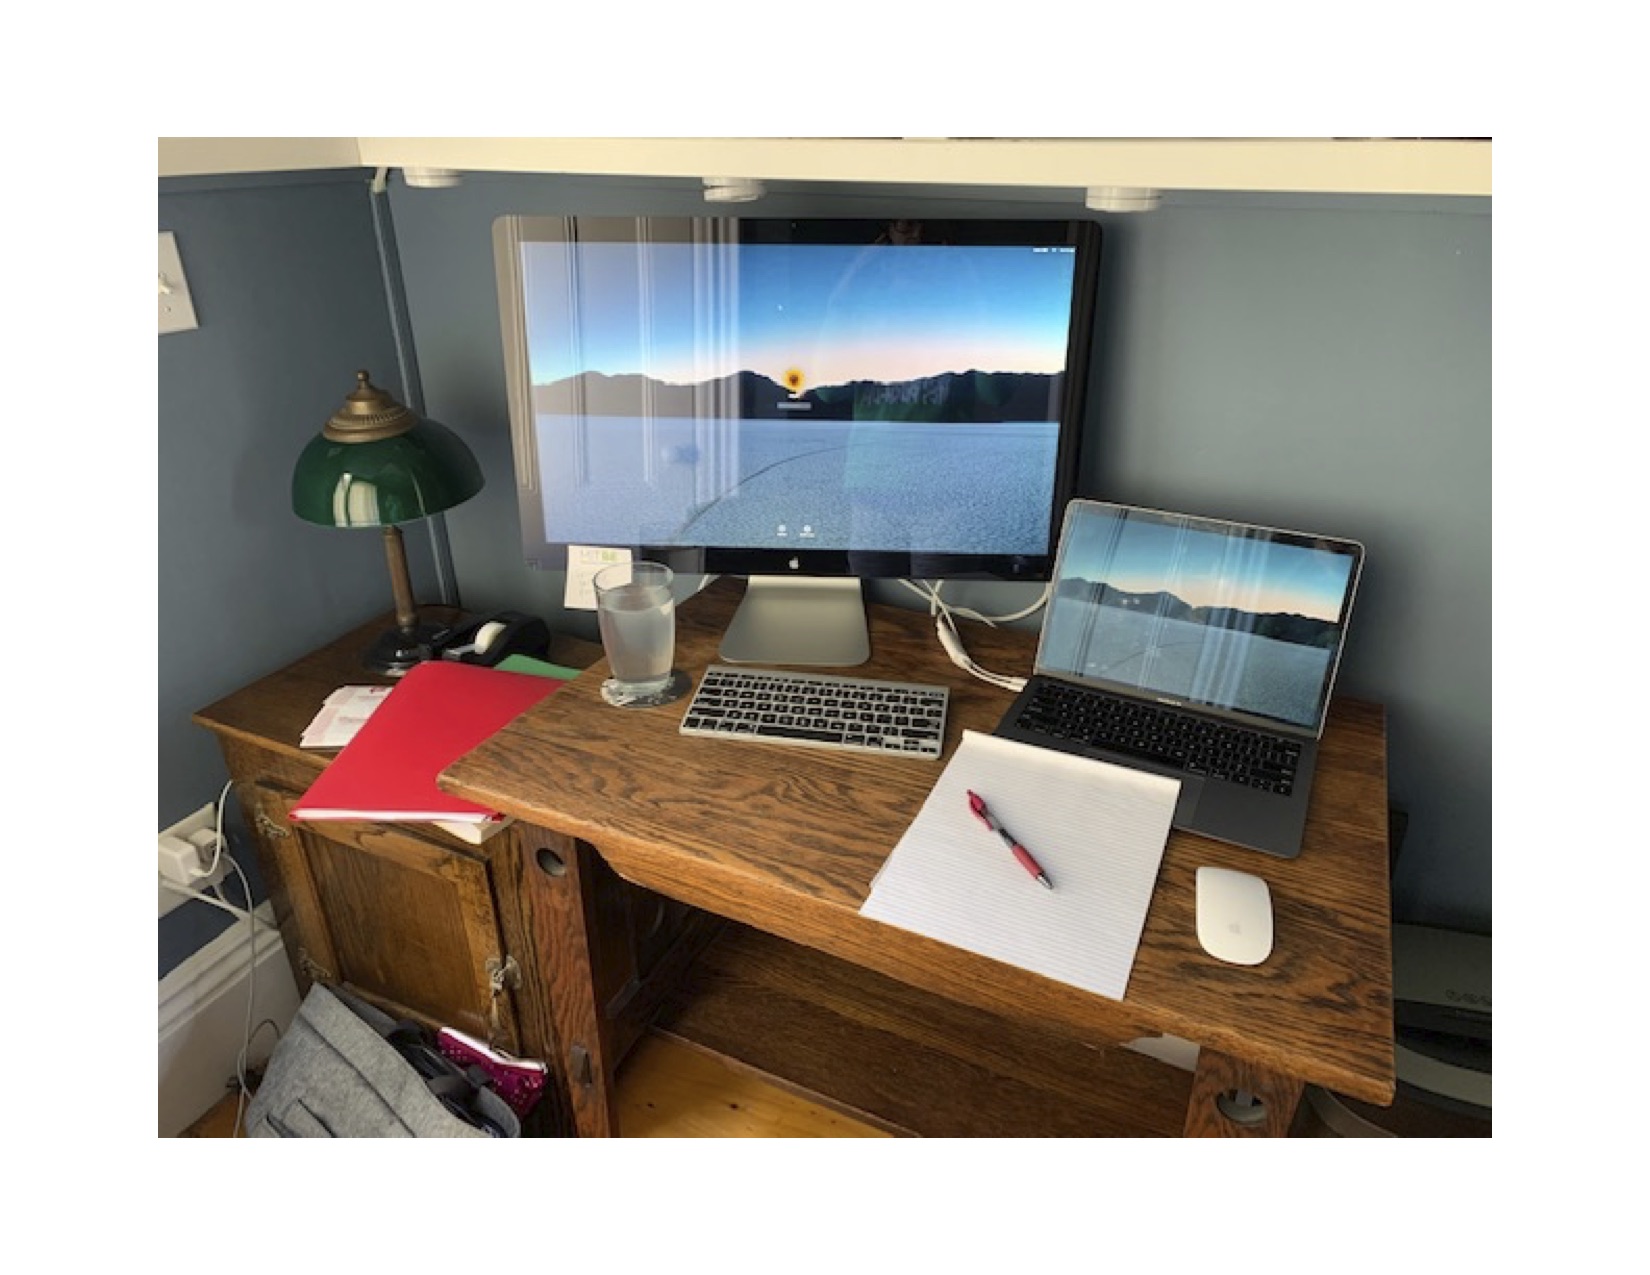 Noreen Lyell working from home workspace